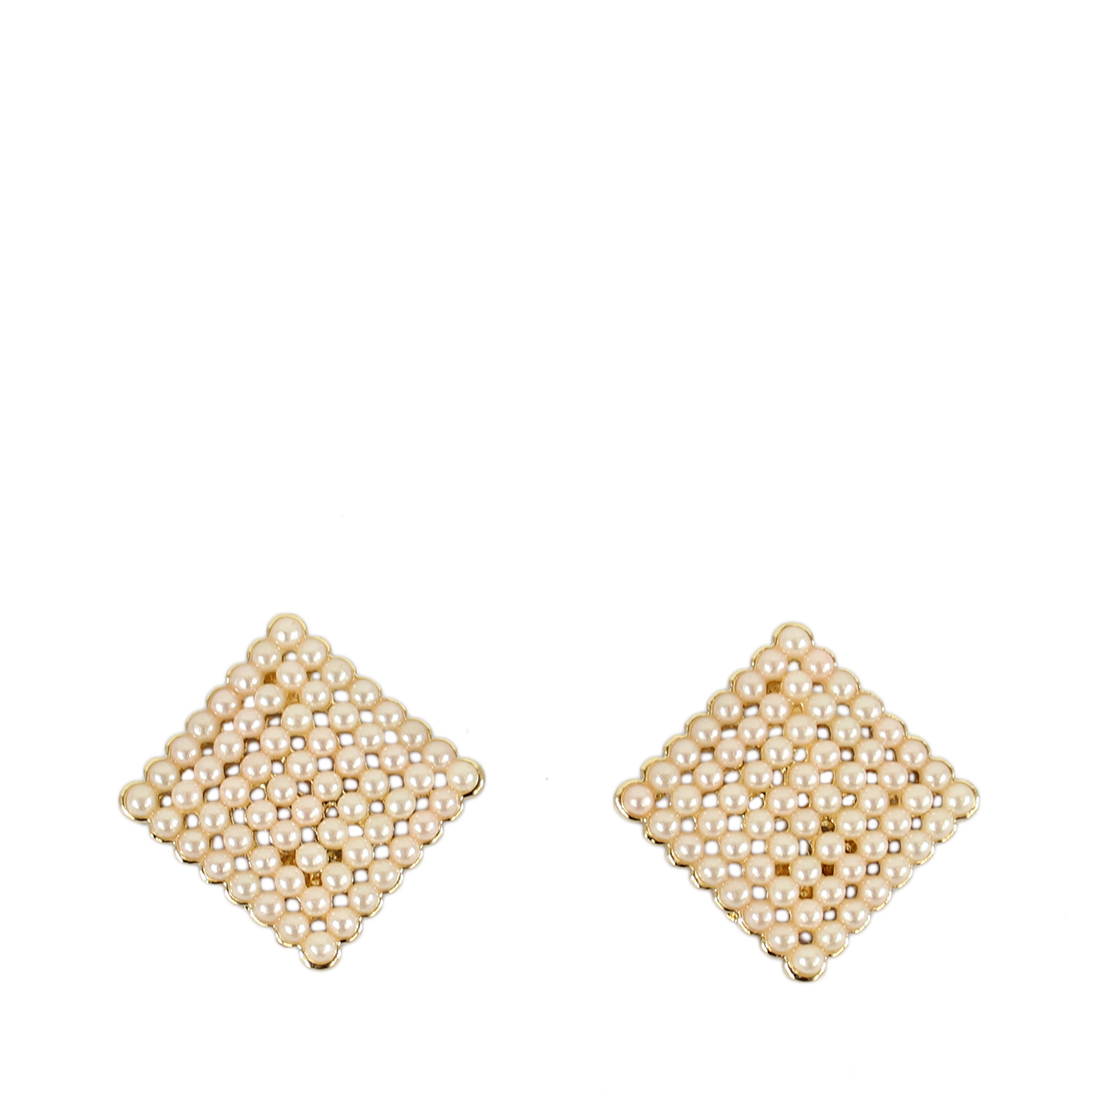 Small square earrings with pearls